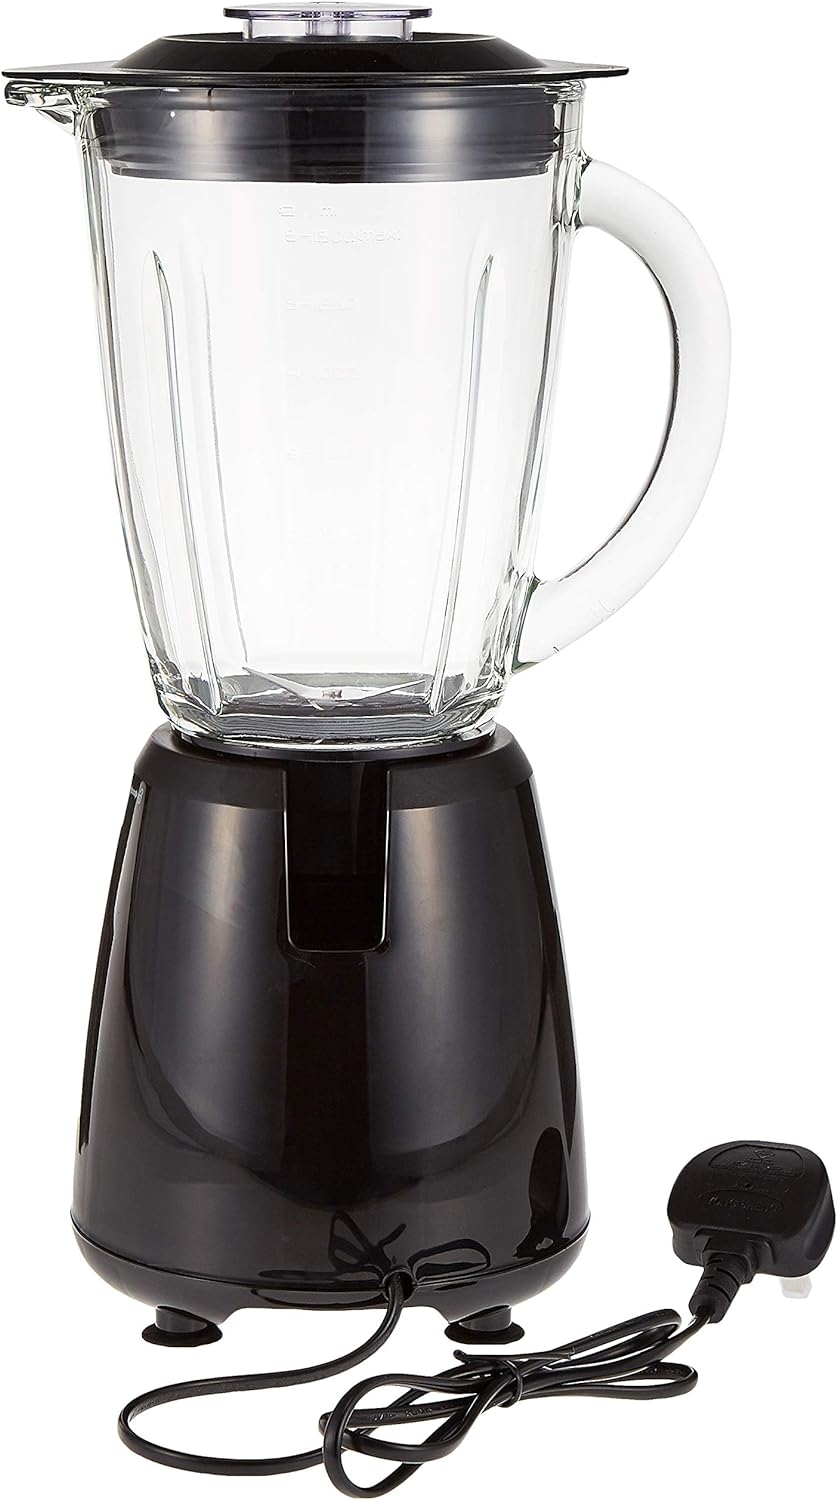 BLACK+DECKER Blender with Grinder Mills, 400W Power, 1.5L with 300ml 2 Grinding Mills, Stainless Steel Blades and Two Pulse Control for Fine and Grinding of Coffee Herbs, BX440-B5